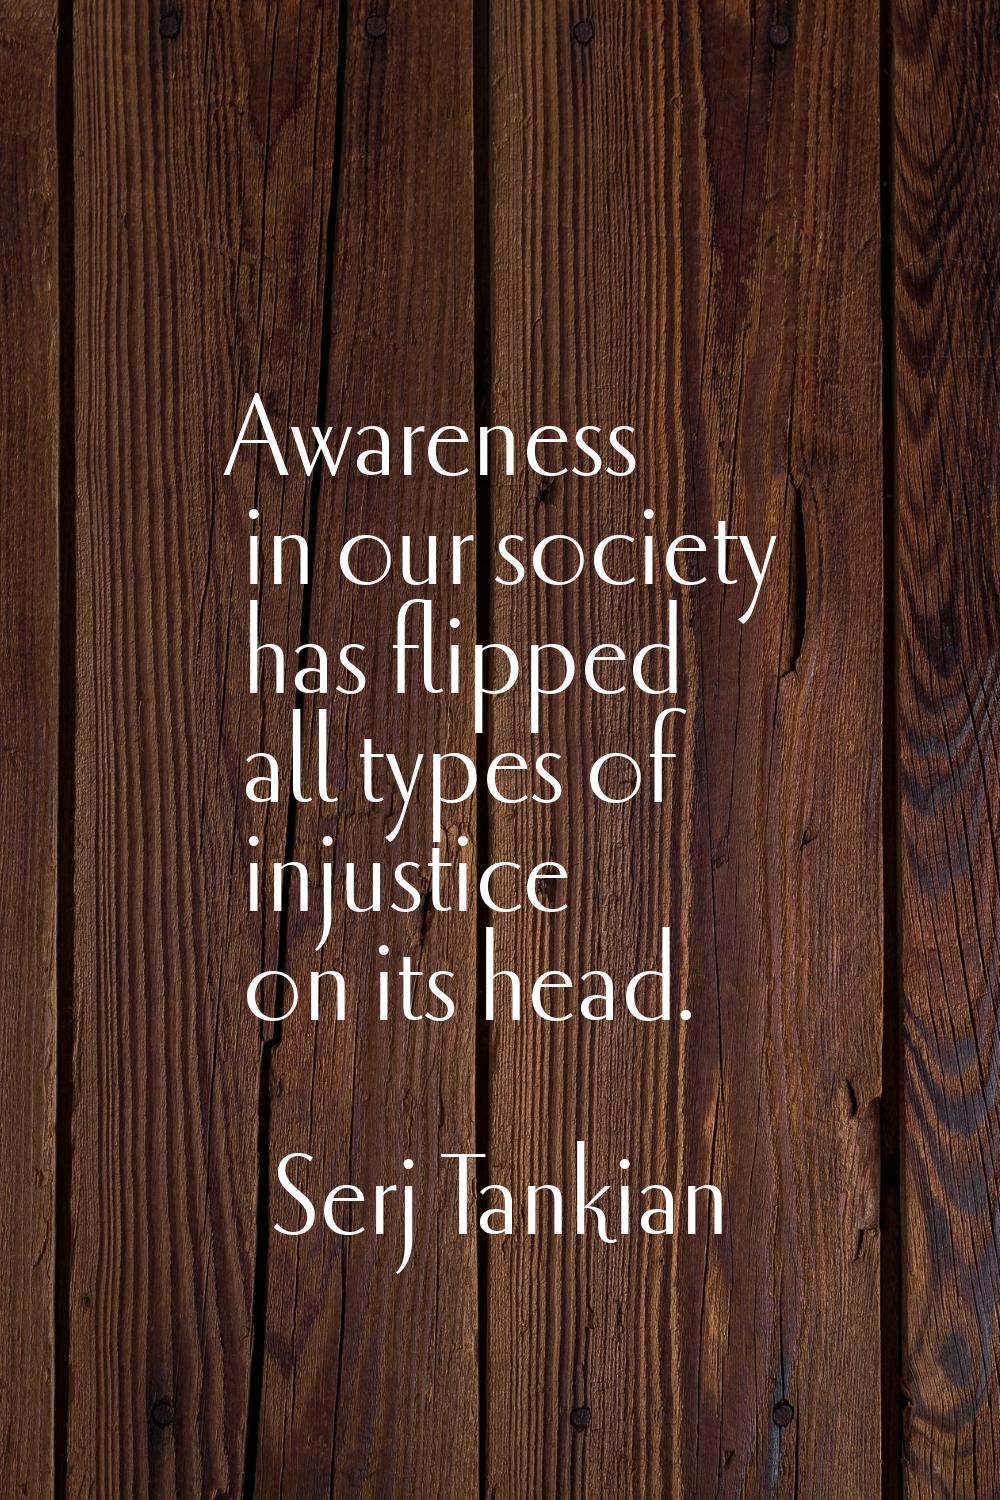 Awareness in our society has flipped all types of injustice on its head.